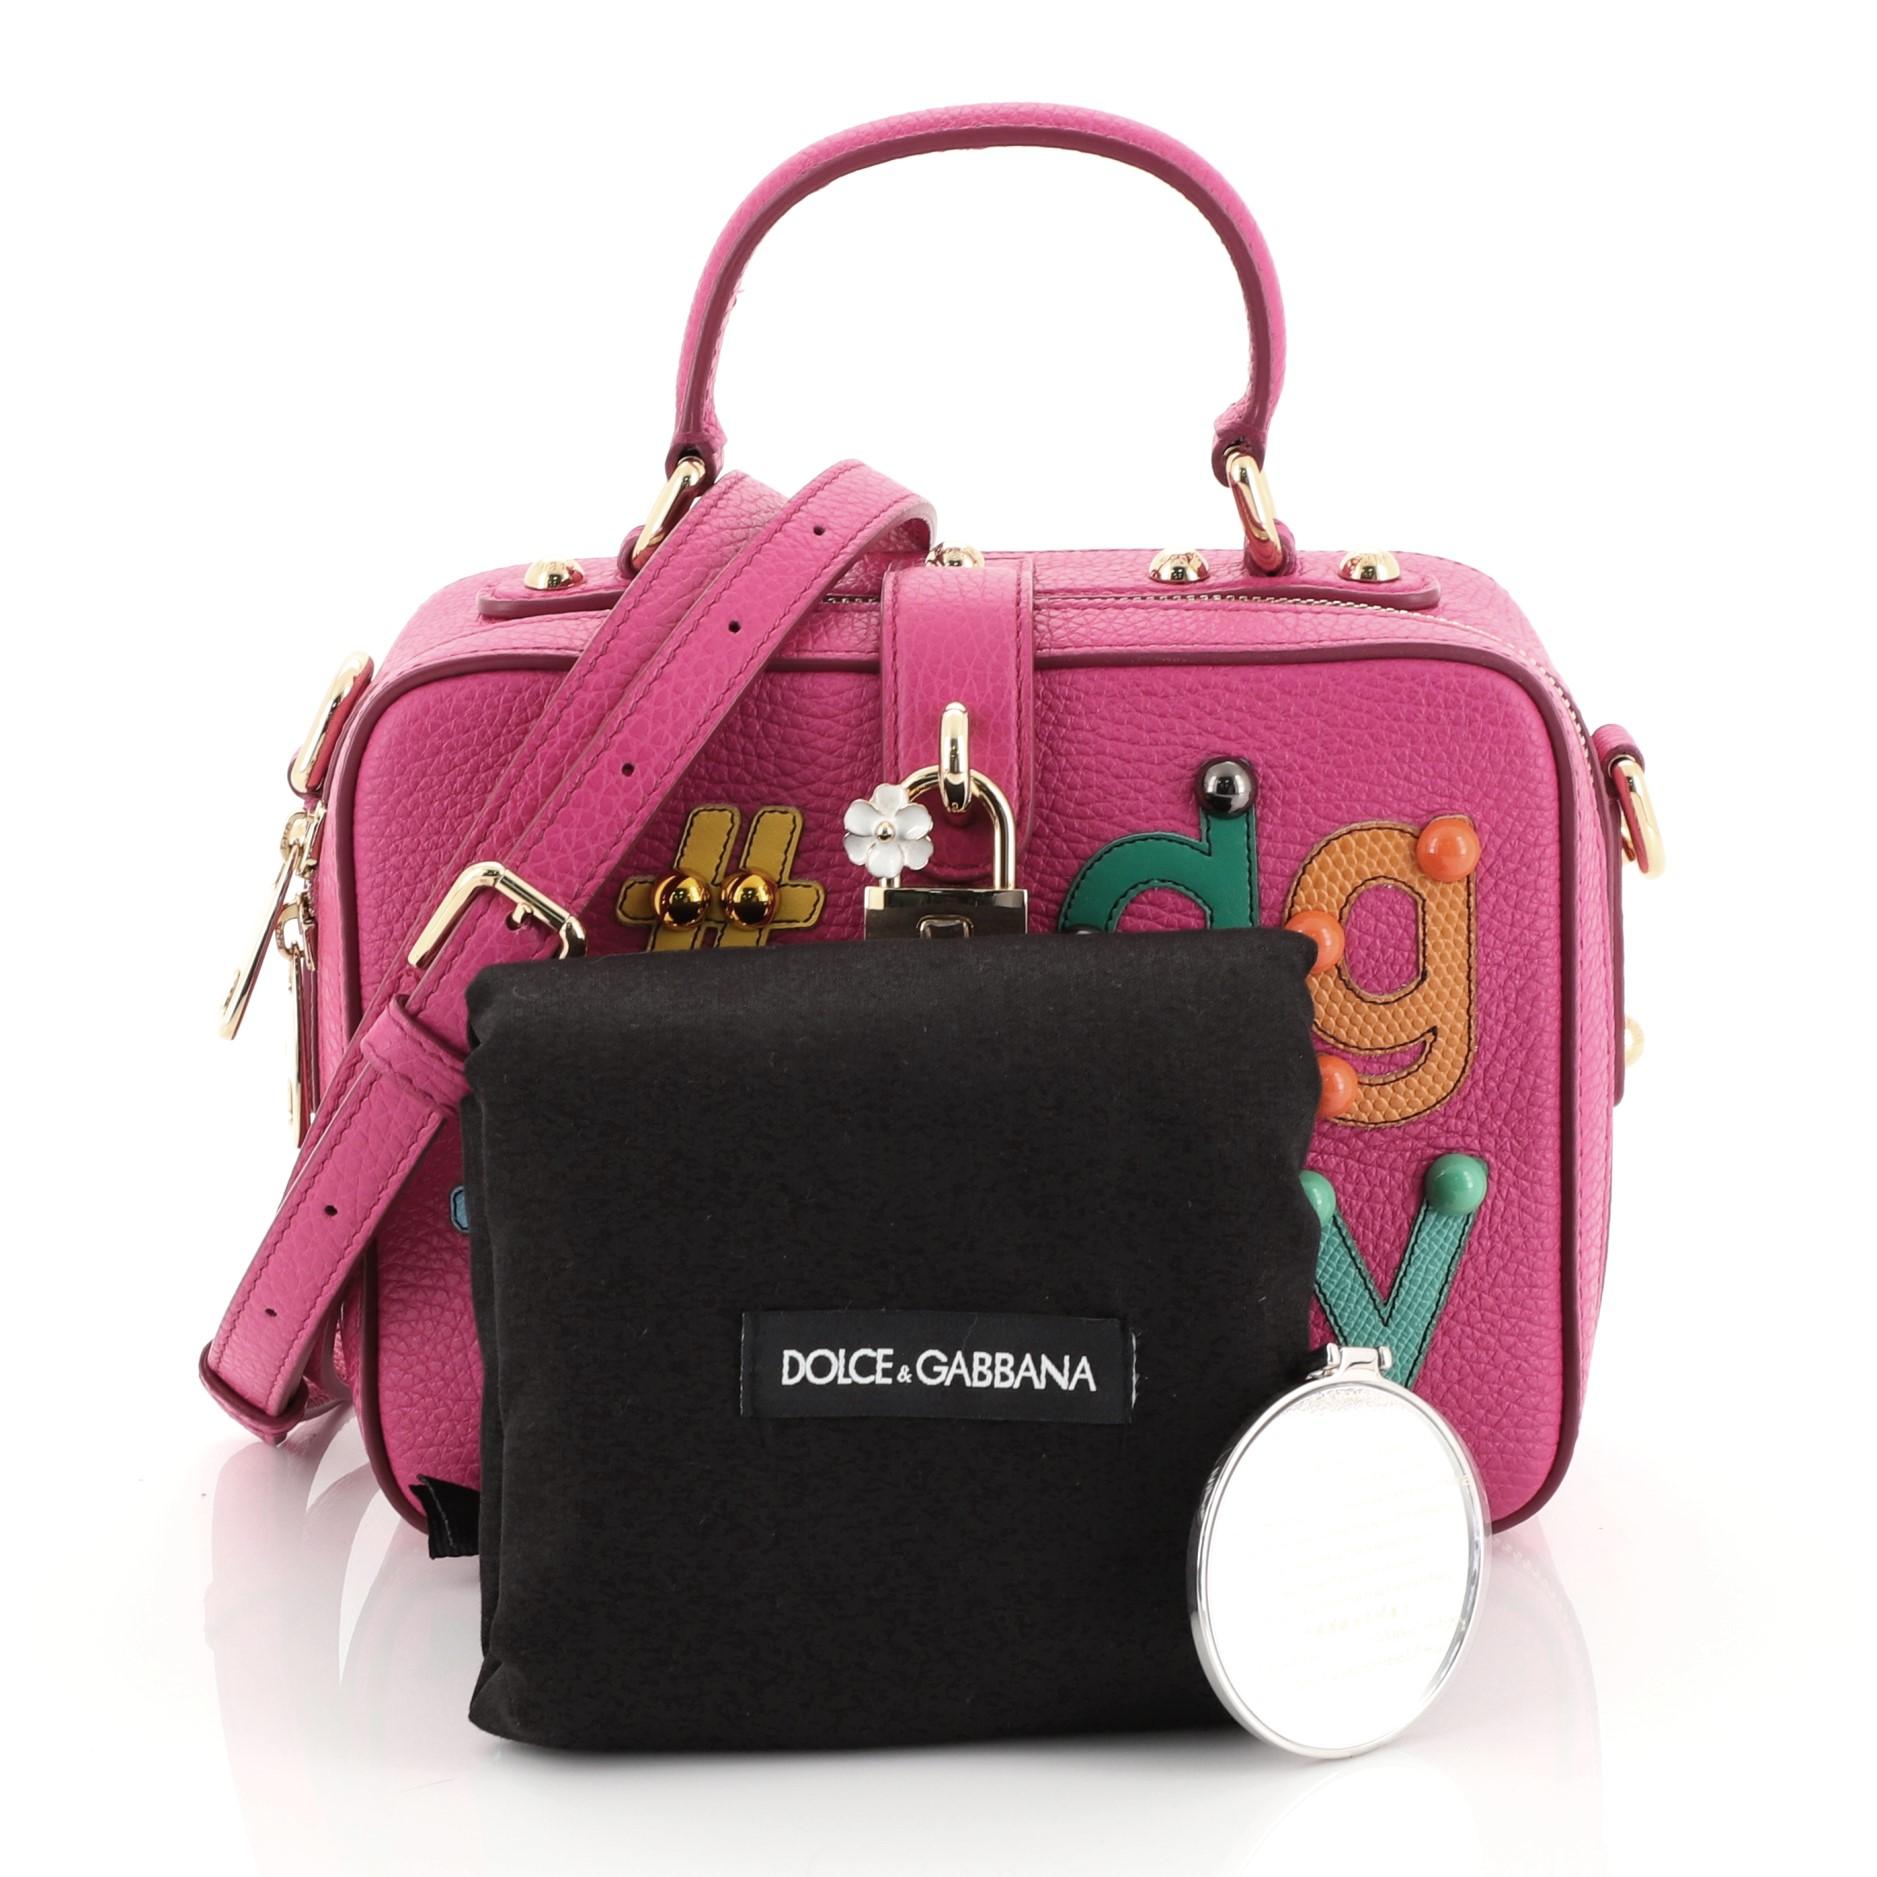 This Dolce & Gabbana Treasure Box Bag Embellished Leather Small, crafted in embellished pink leather, features a leather top handle, #DG family patch, and gold-tone hardware. Its padlock style turn-lock closure opens to a black print fabric interior